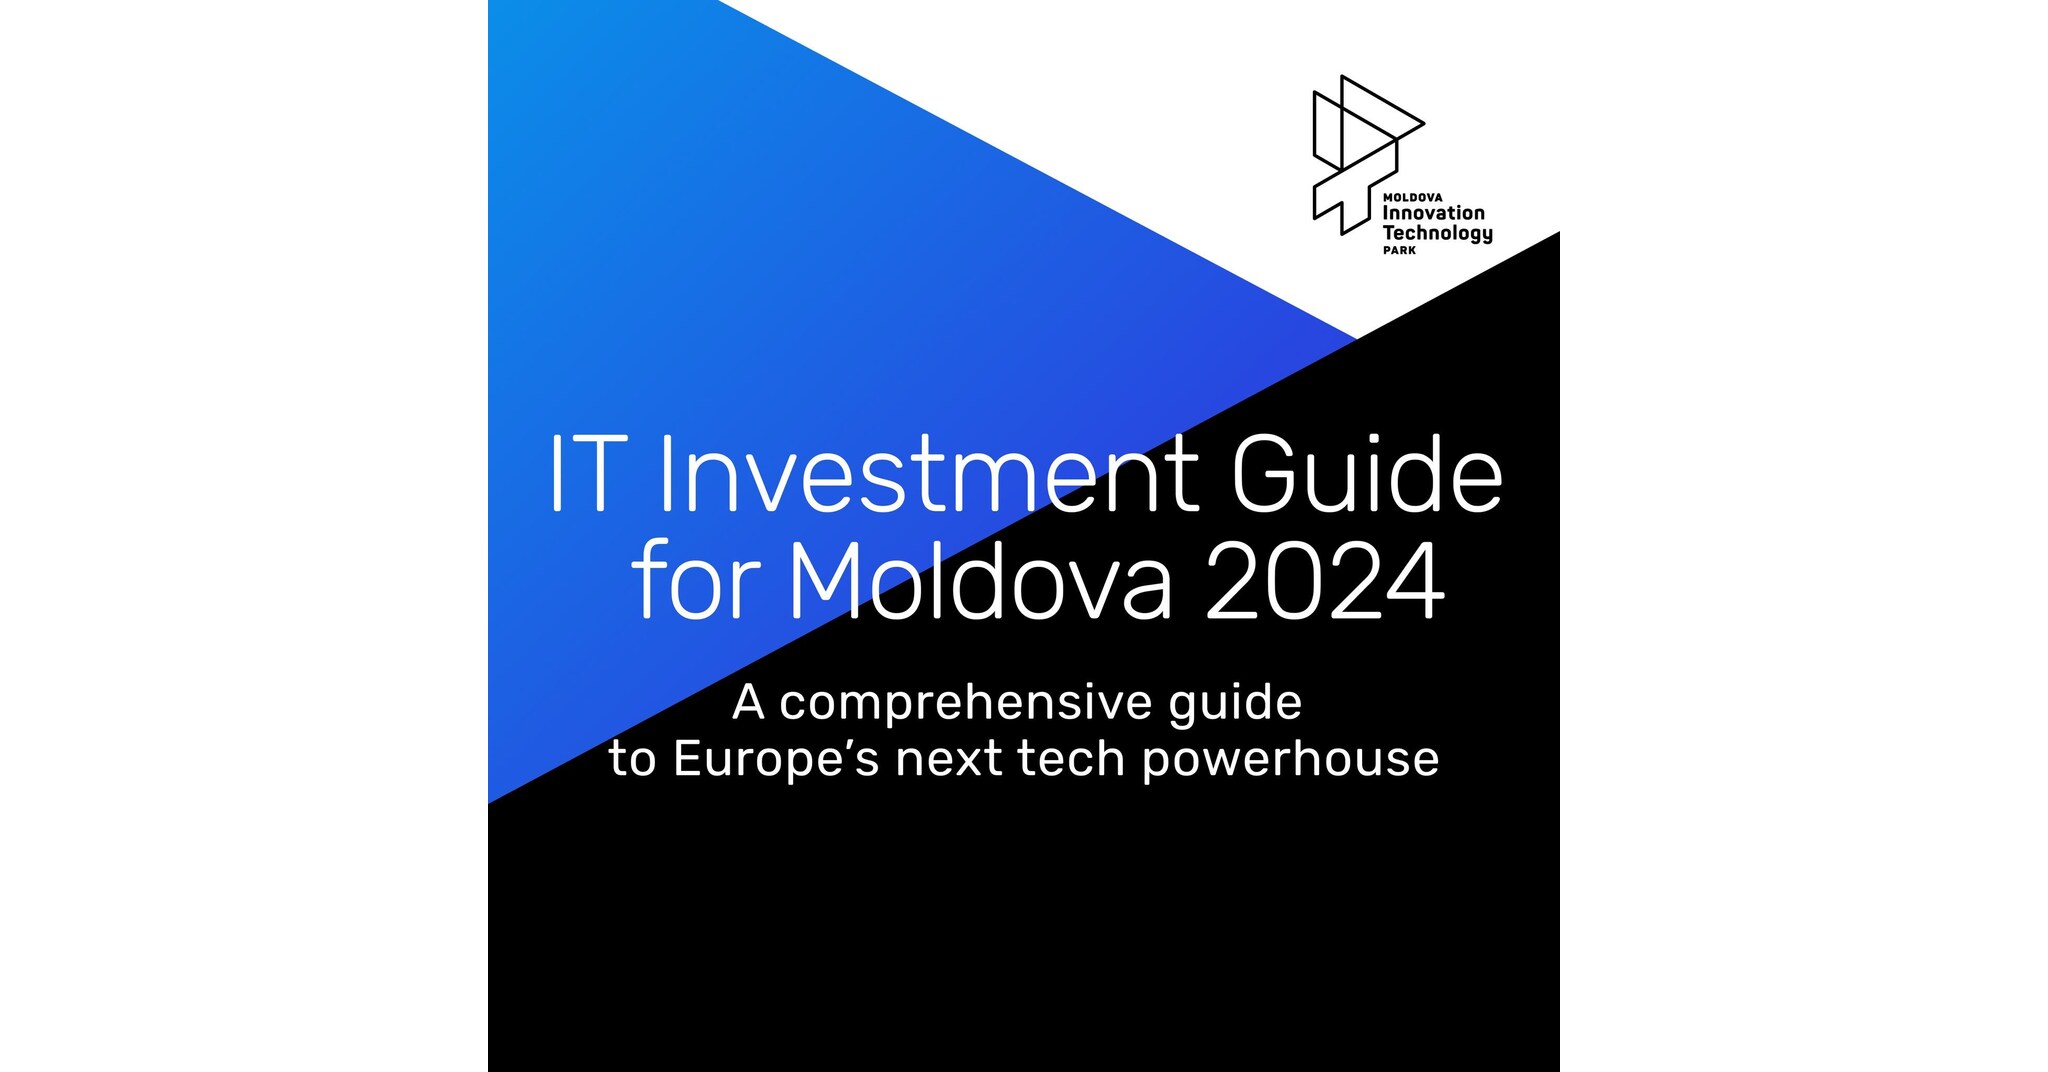 Moldova Innovation Technology Park Unveils Comprehensive IT Investment Guide Highlighting Tech Potential